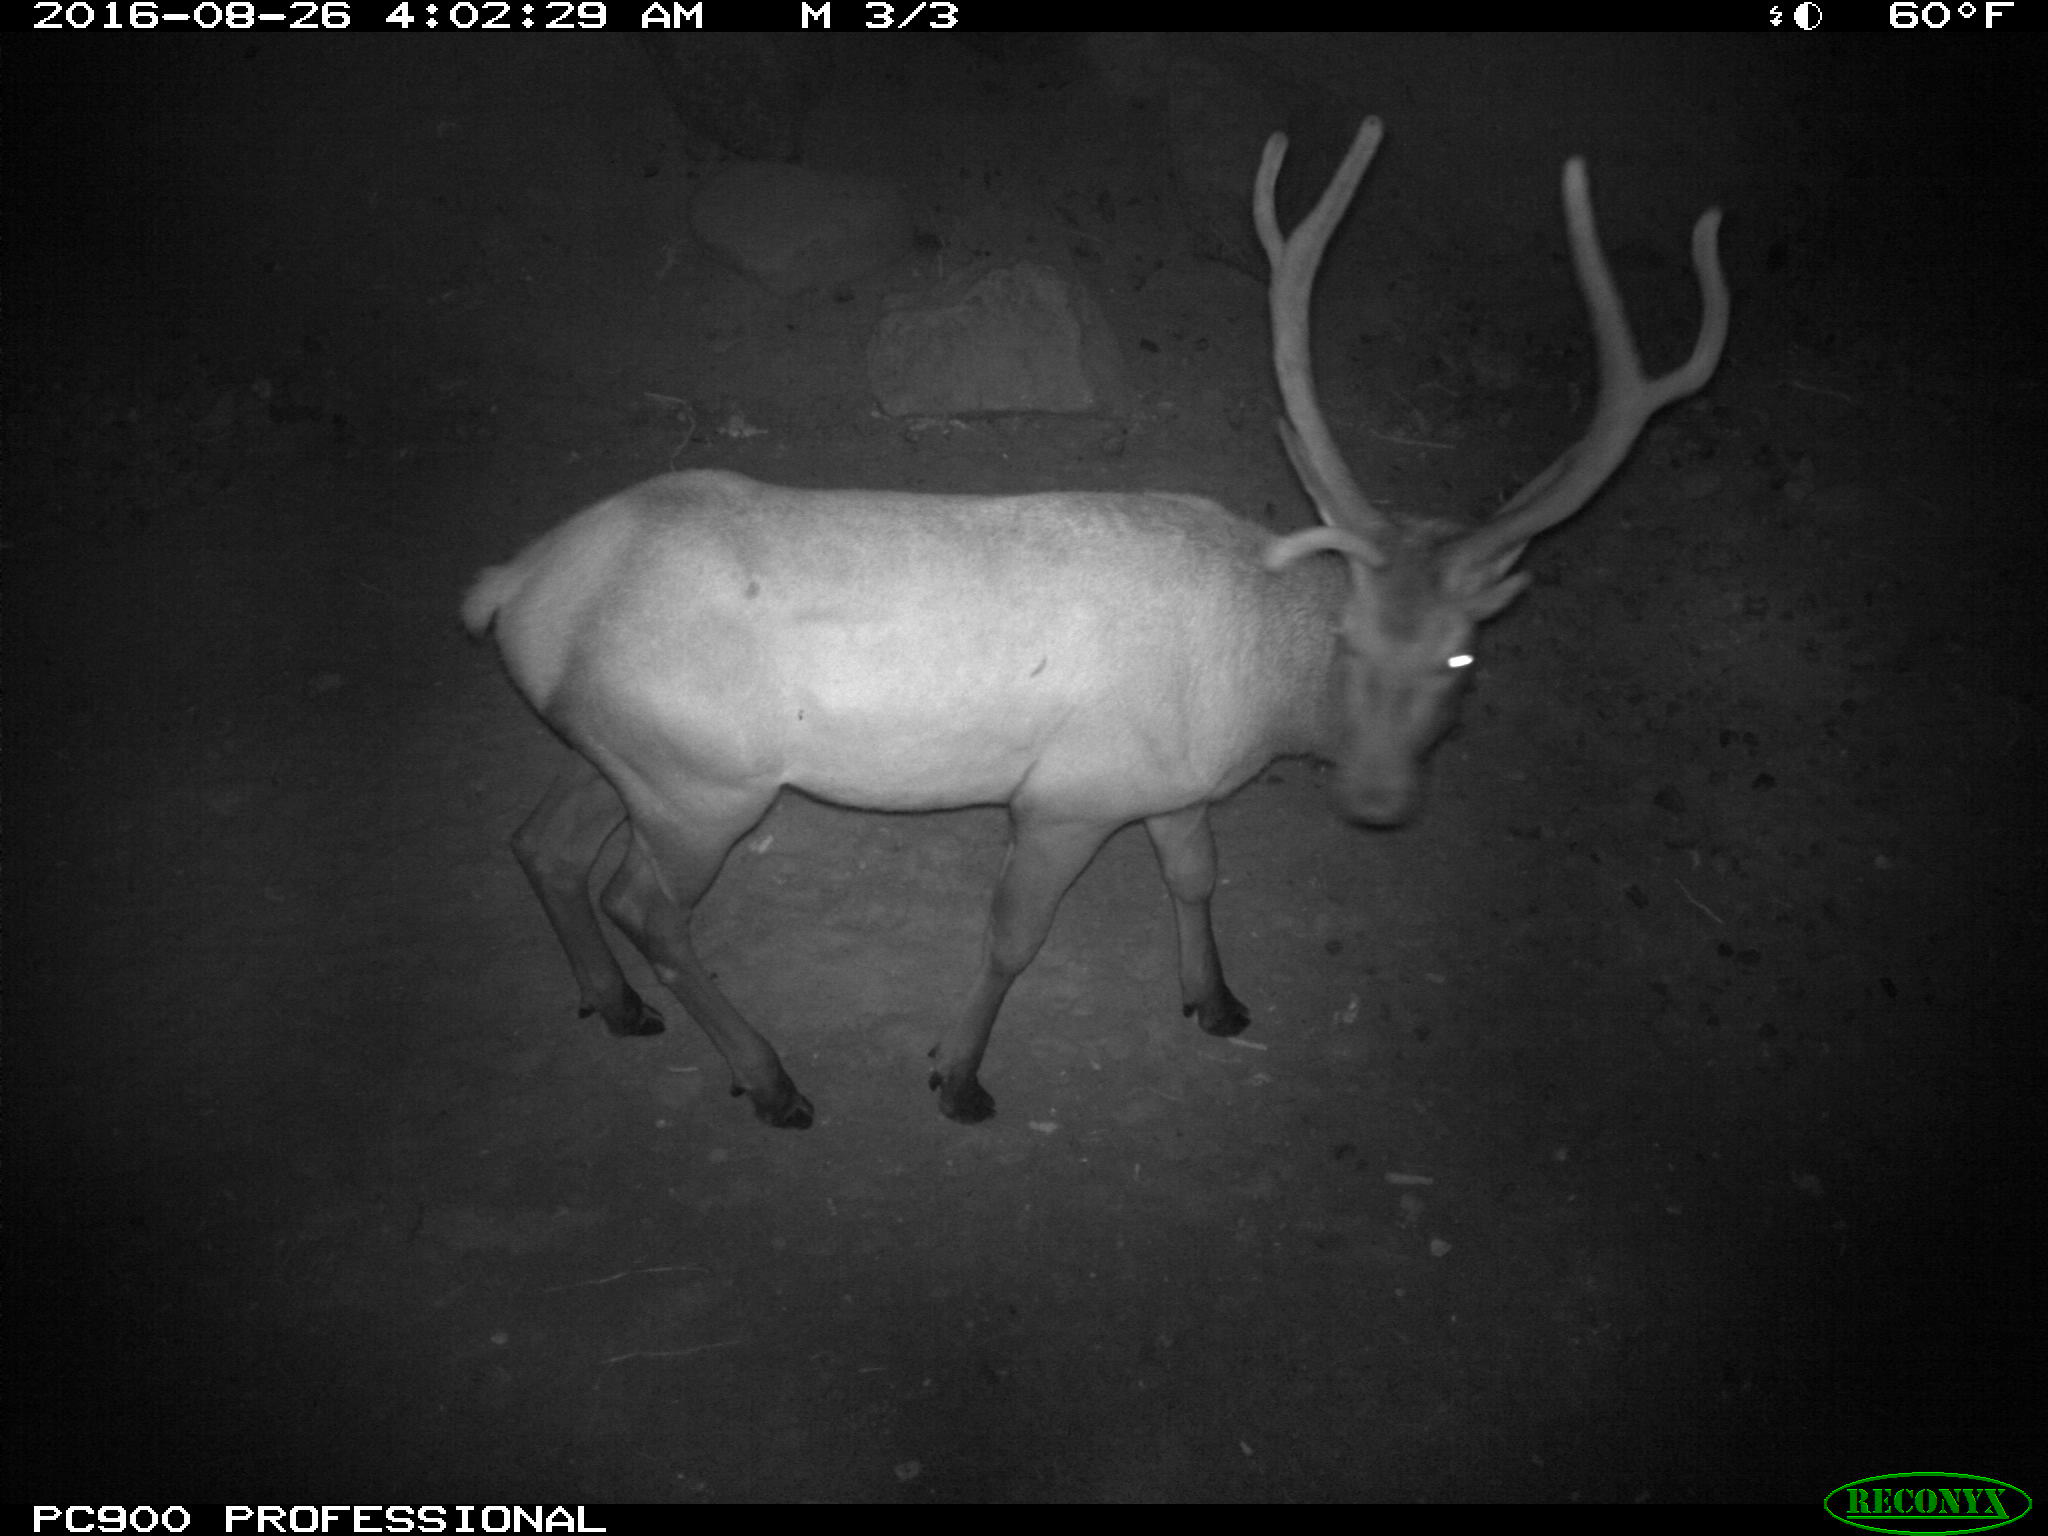 Bull elk passing through a US Highway 95 underpass in North Idaho